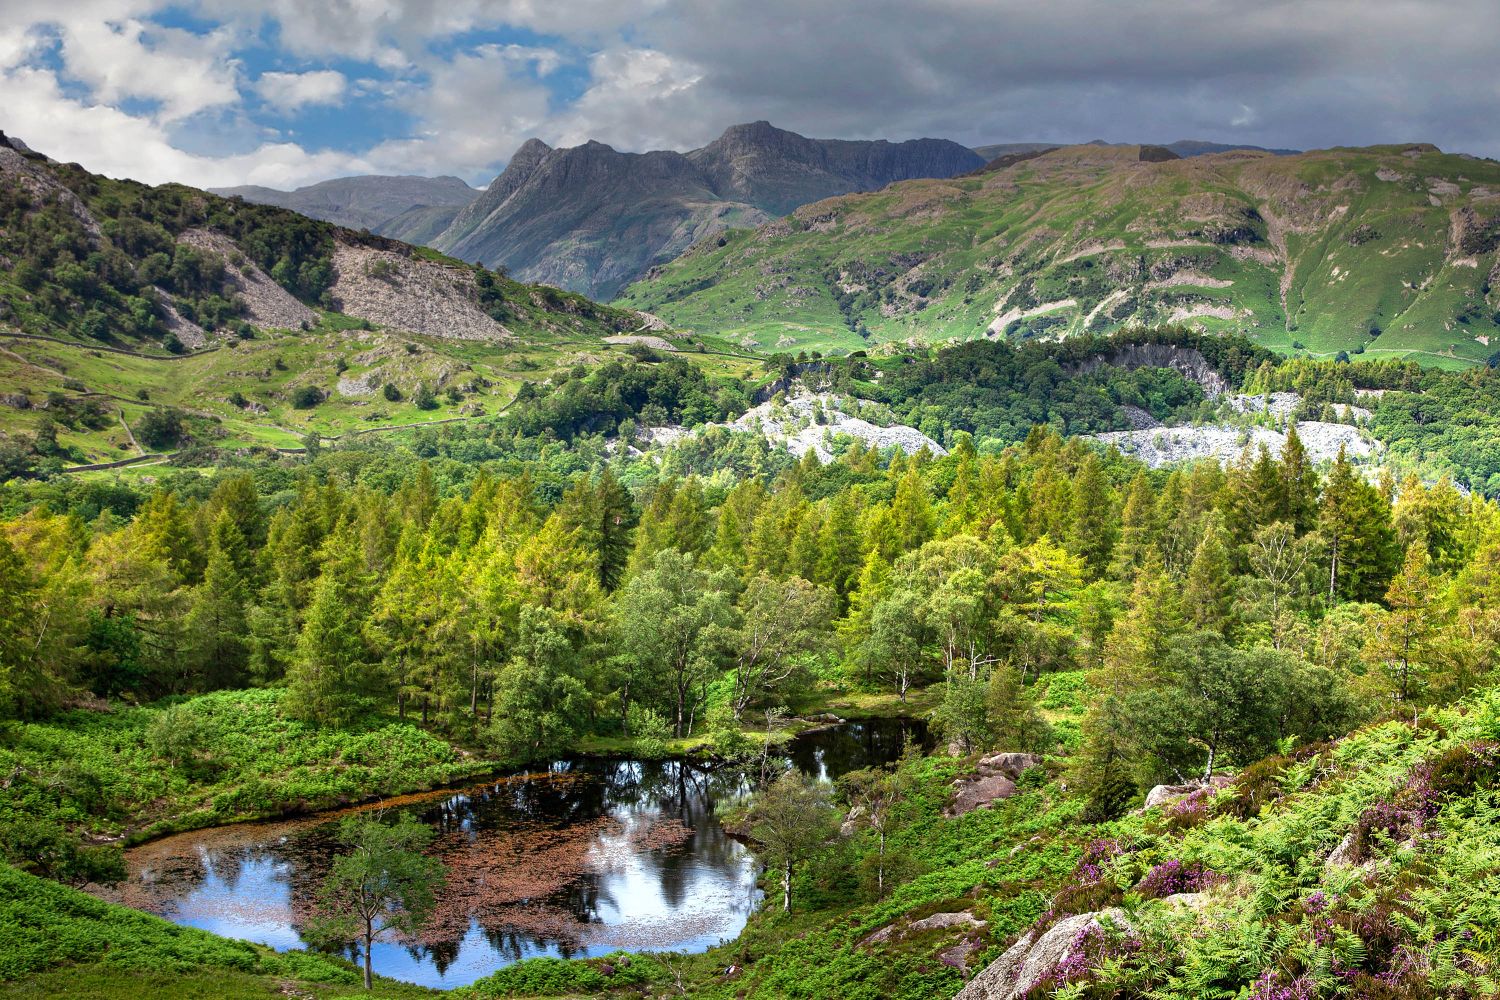 The Langdale Pikes across The Tilberthwaite Valley by Martin Lawrence